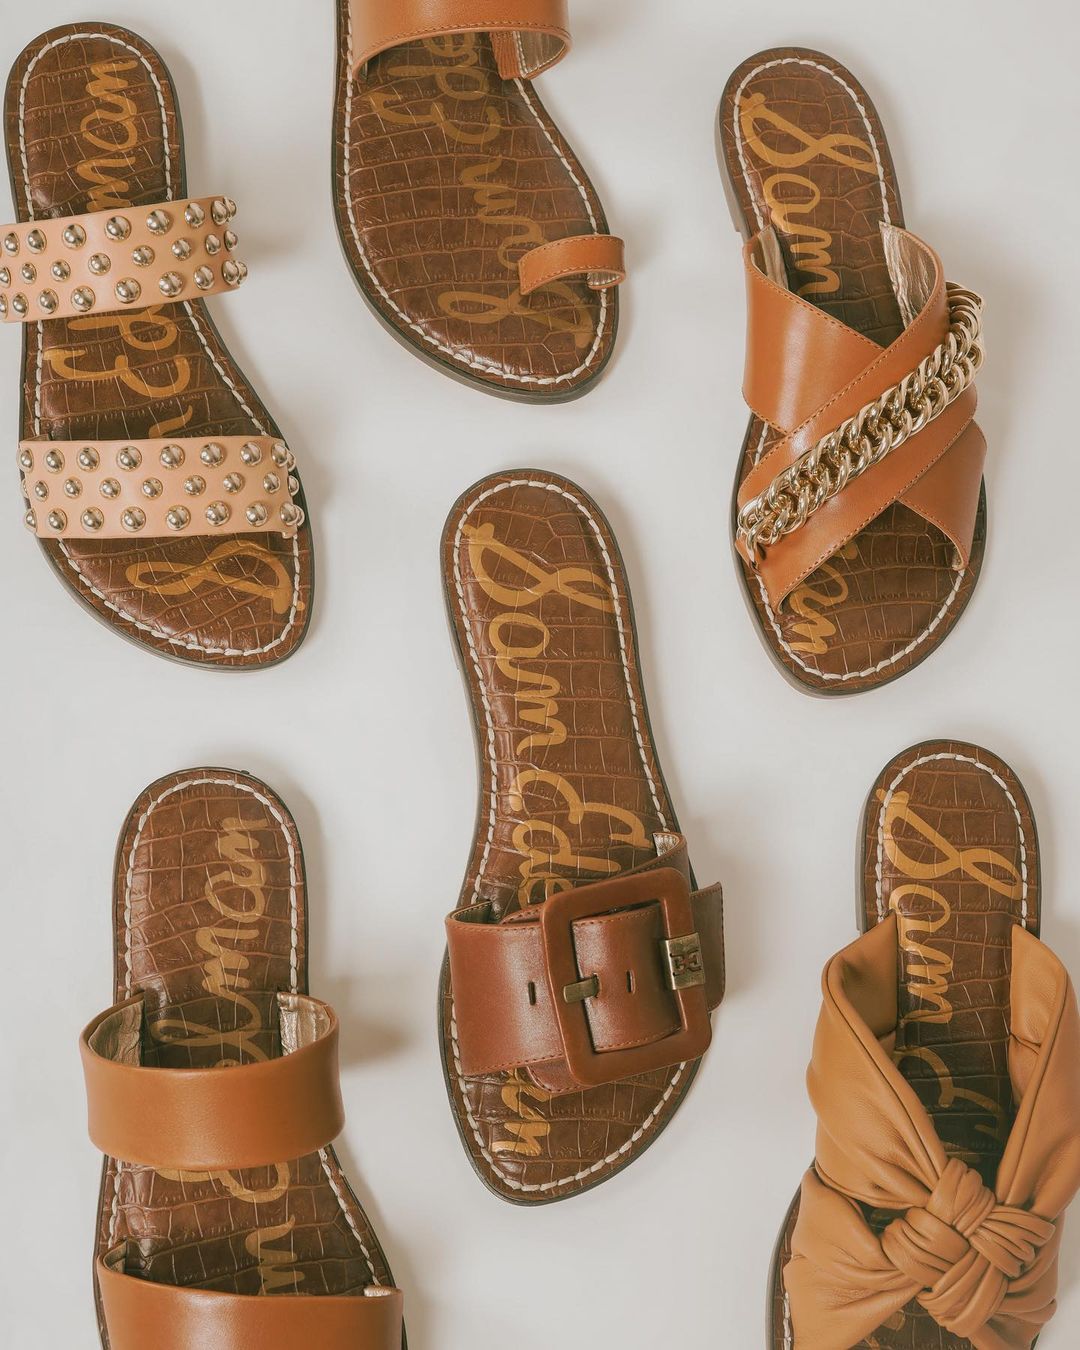 The Absolute Best Sandals for Wide Feet on the Market